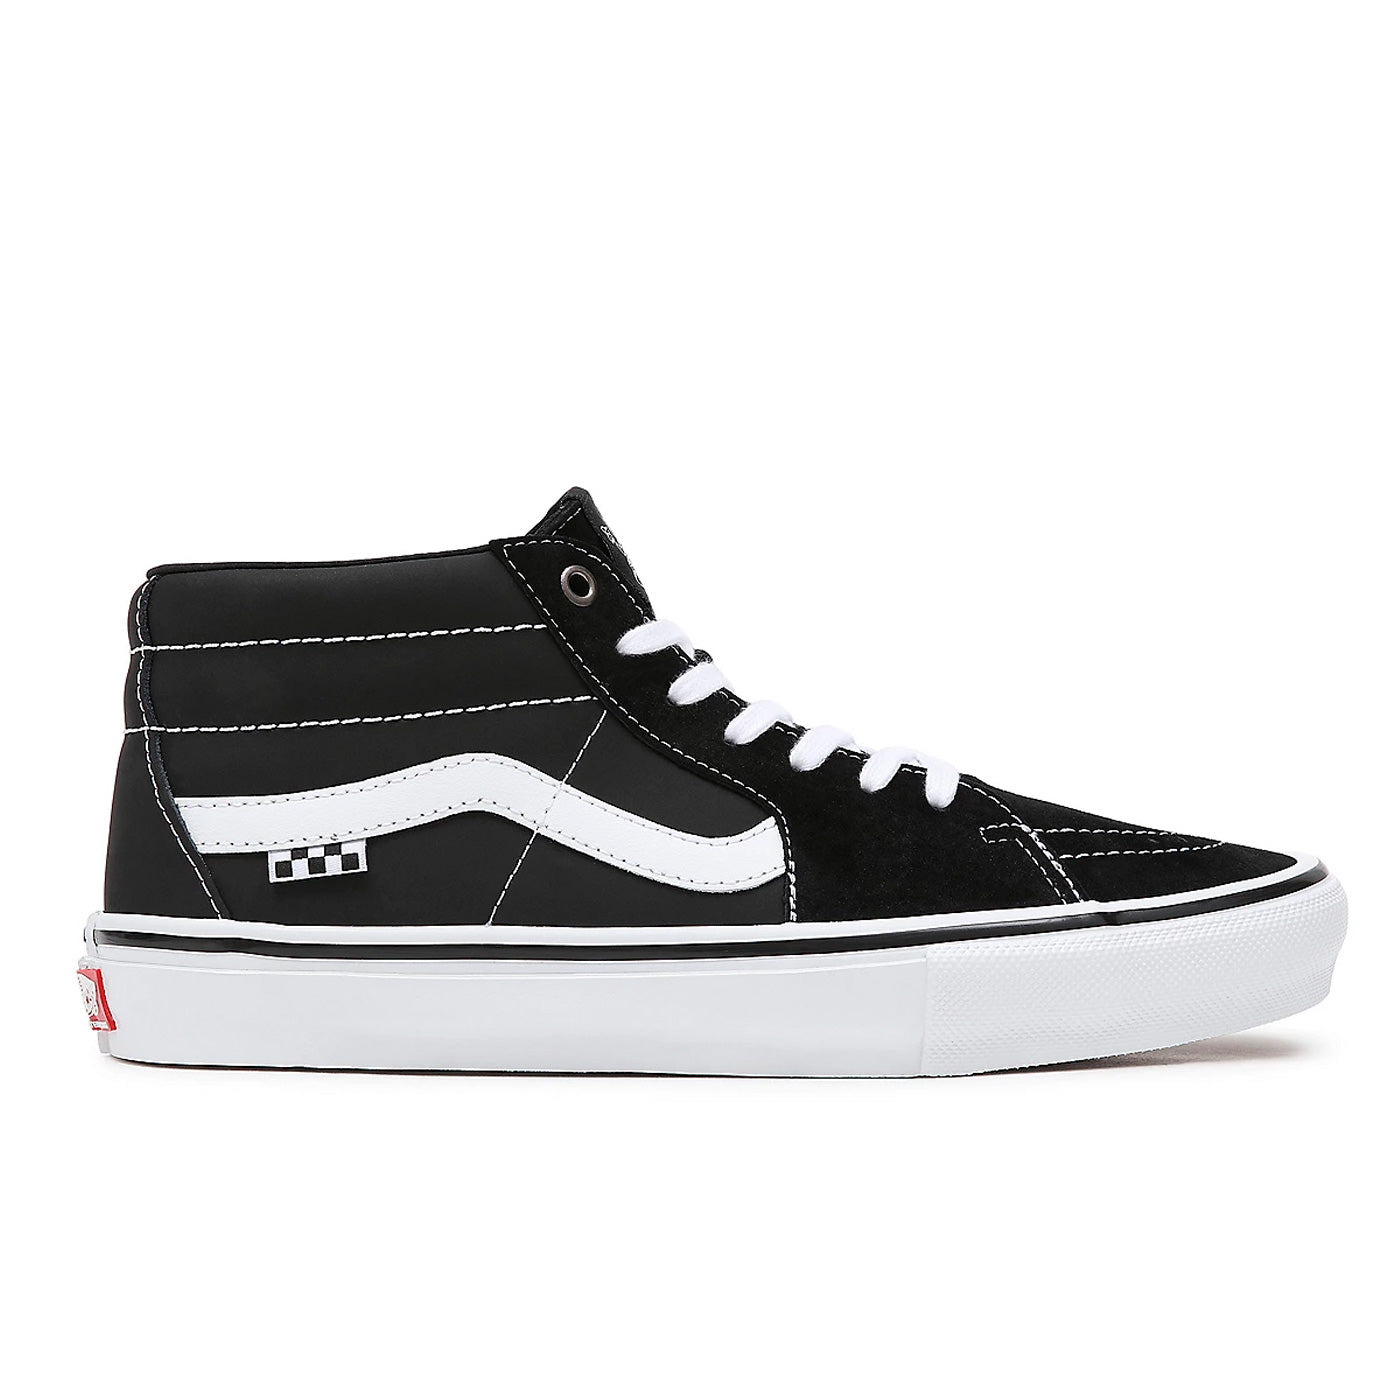 Black and white Jeff Grosso Vans mid top laced skate shoes with white sole. Free uk shipping over £50